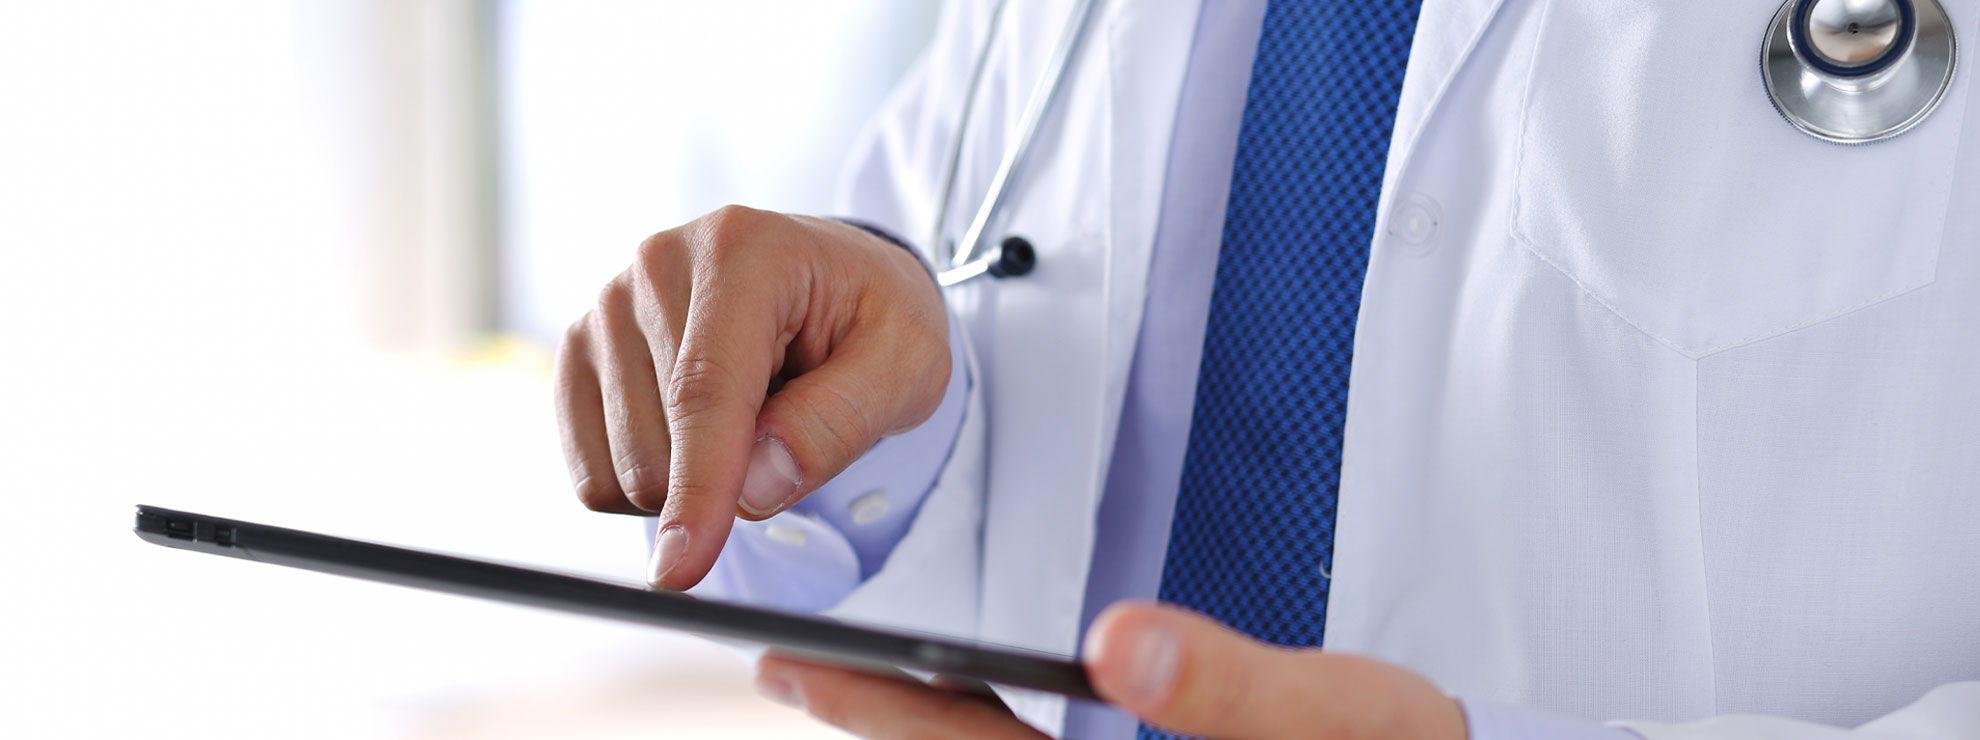 Digitize and Manage Healthcare Documents